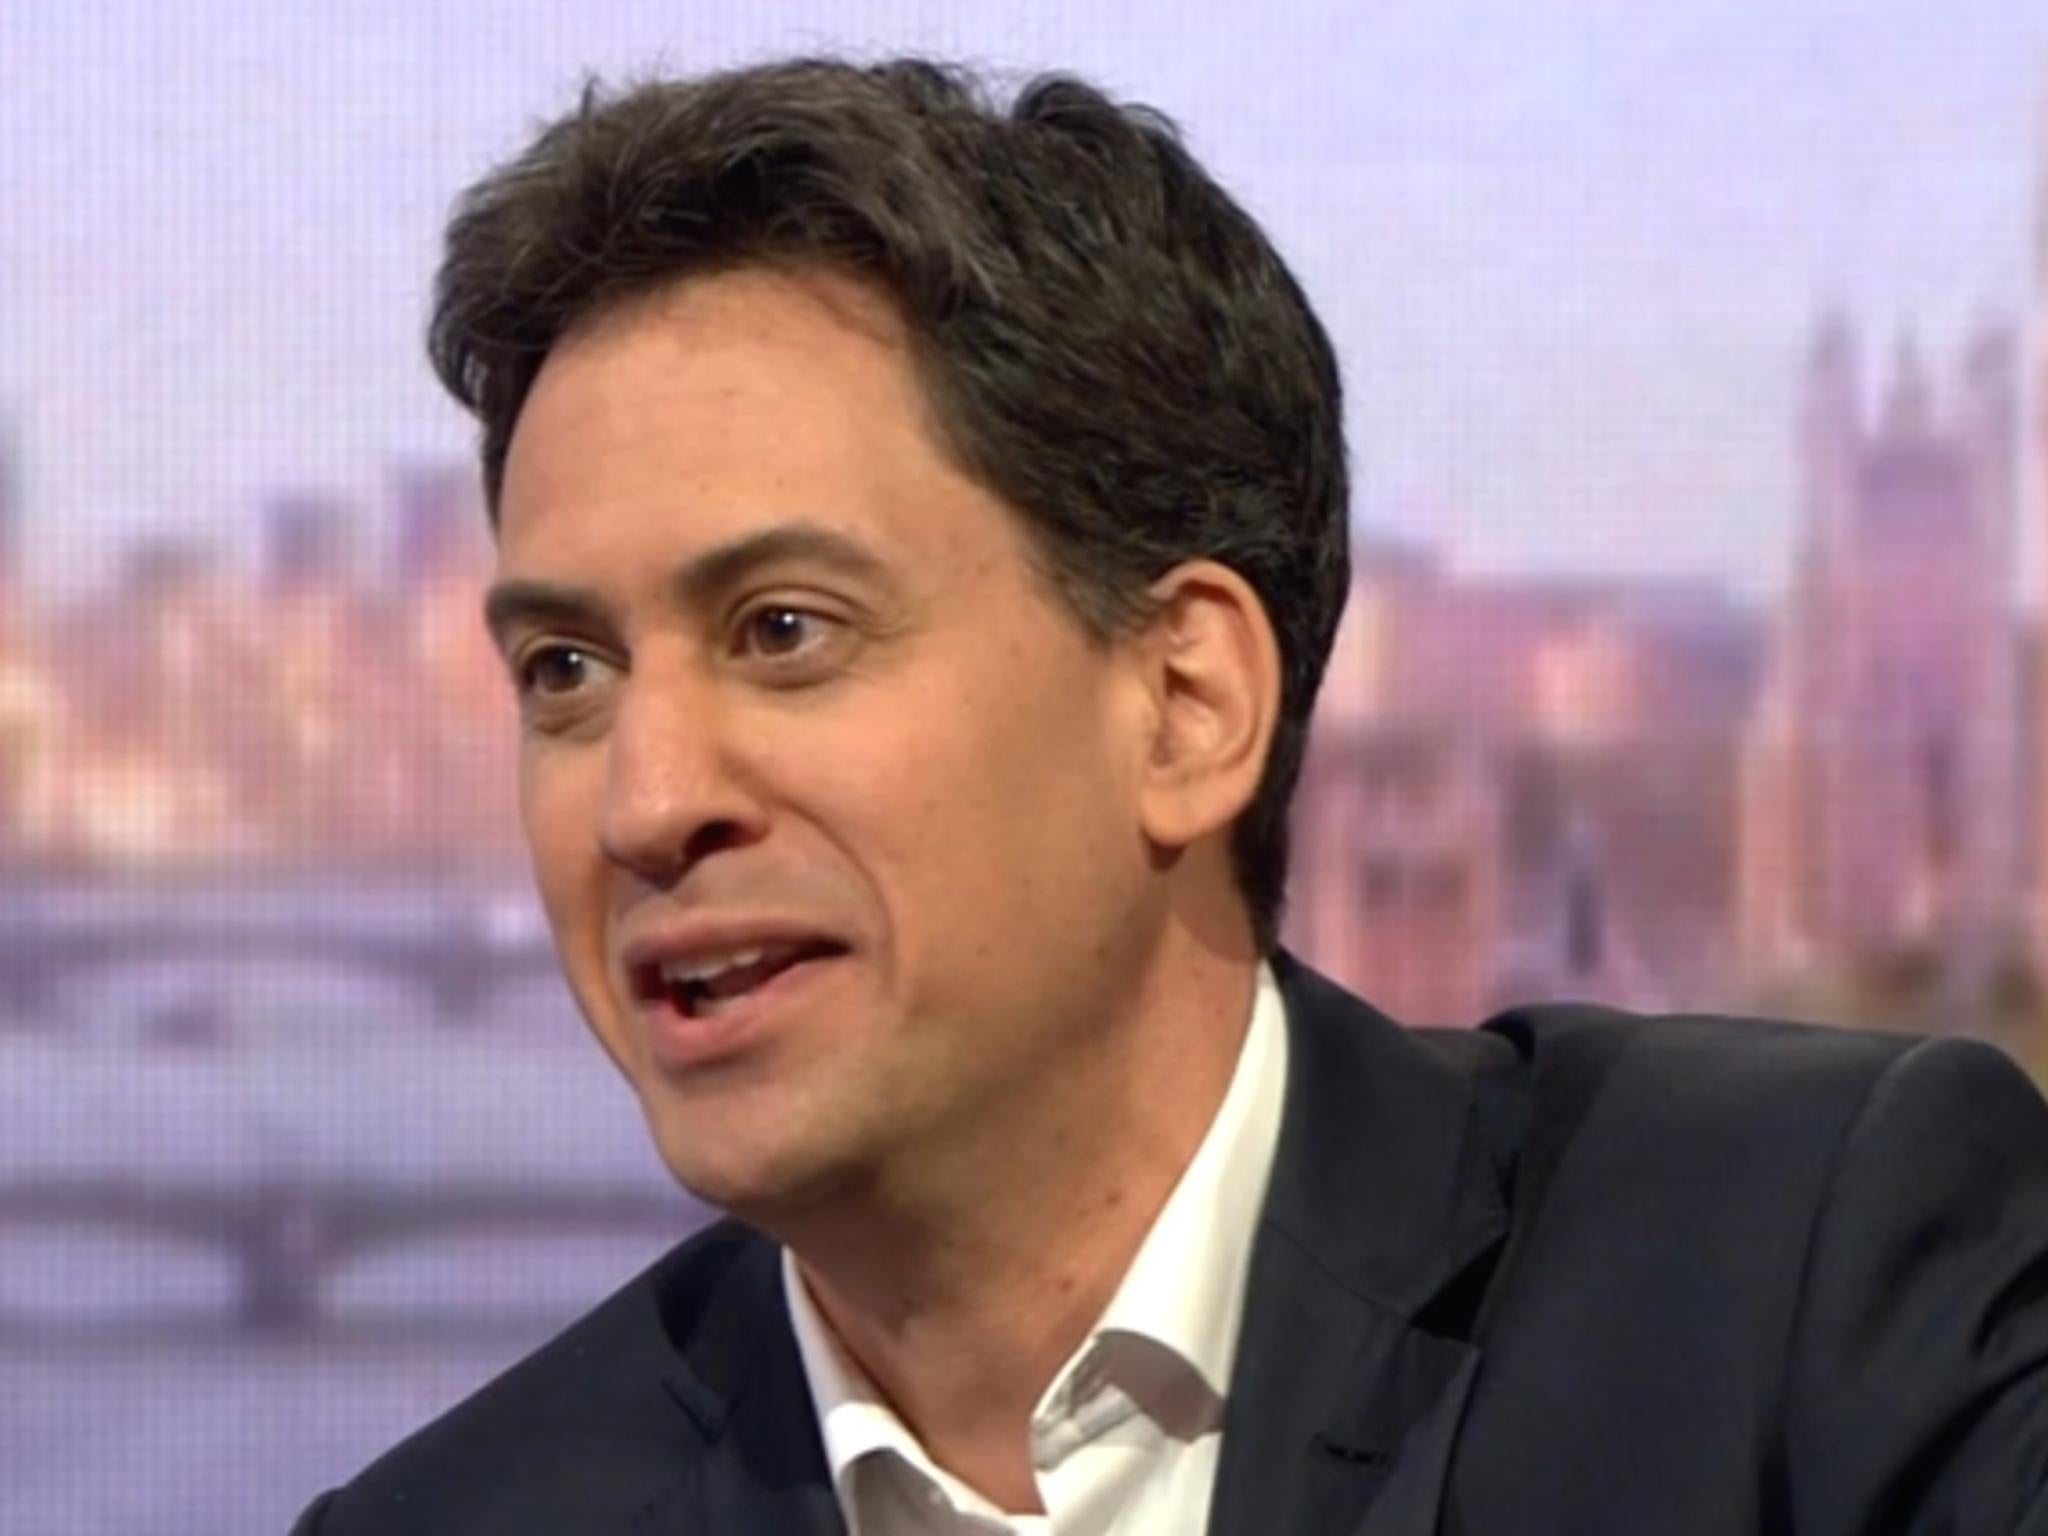 Ex-Labour leader Ed Miliband on the Andrew Marr Show